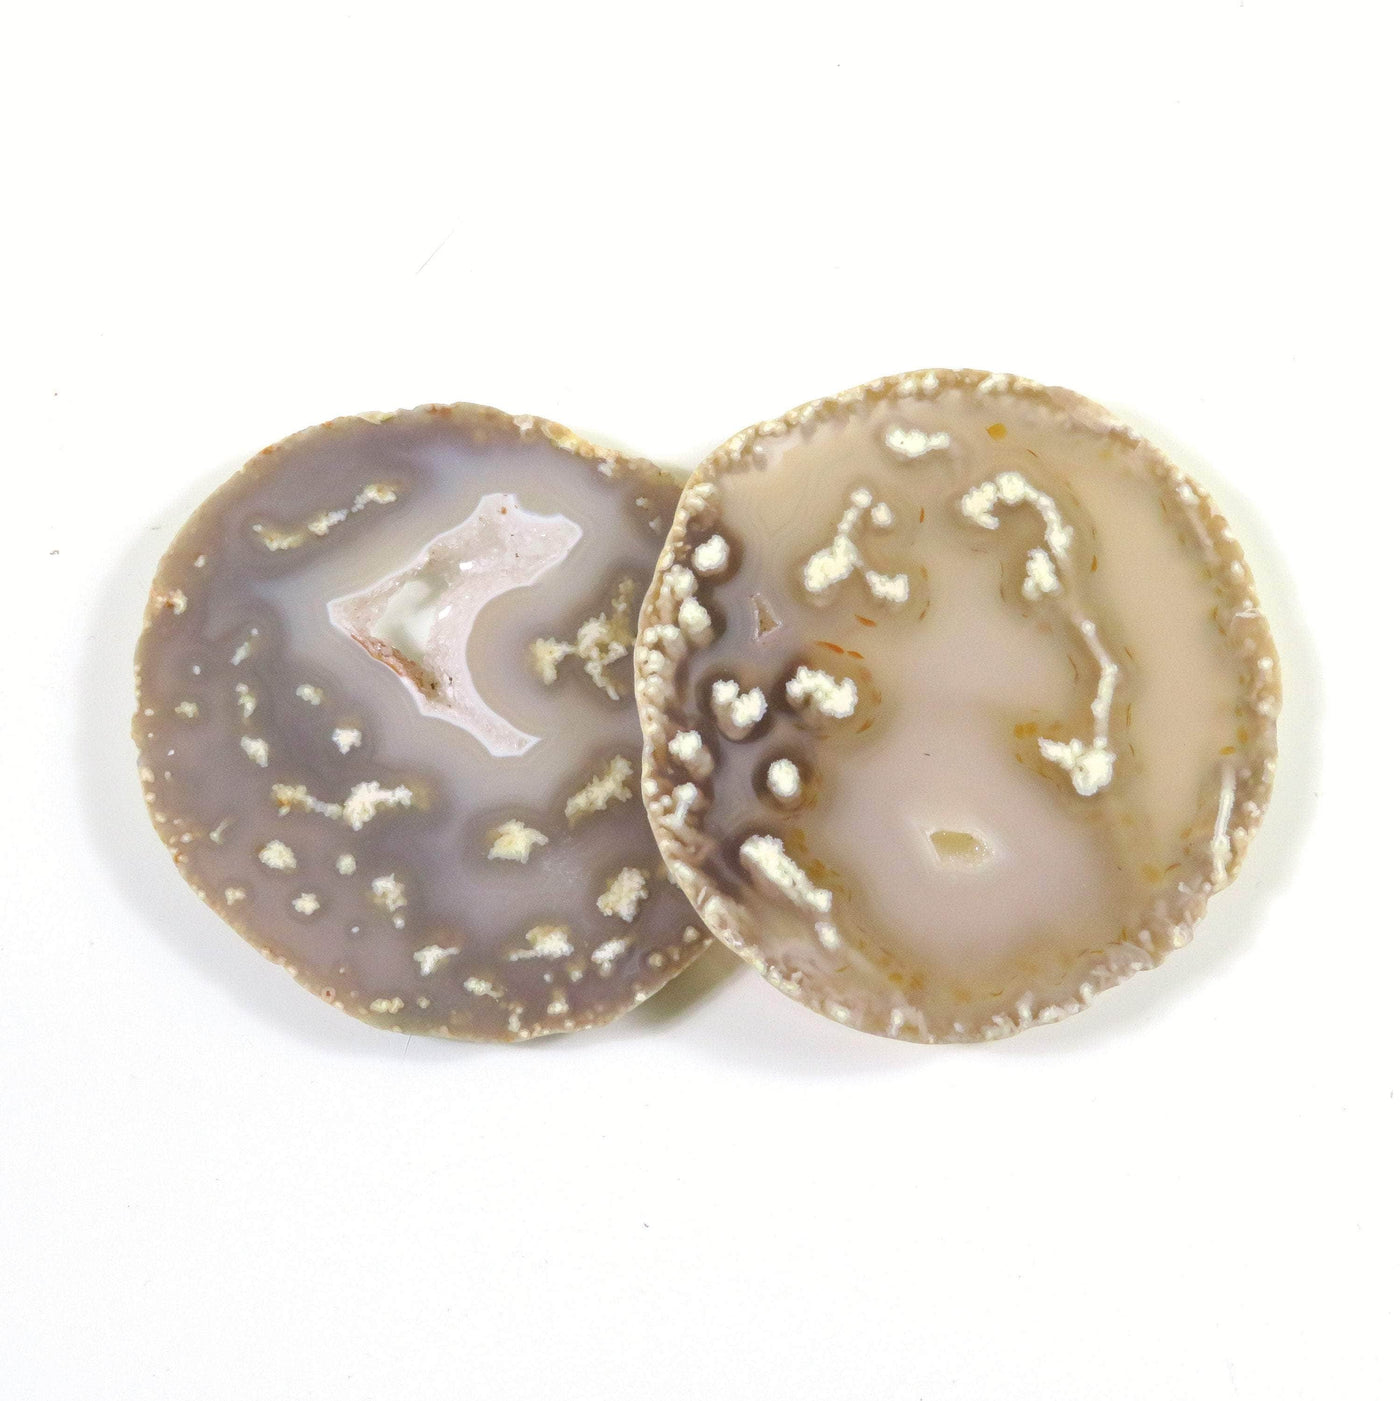 Natural Druzy Agate Slices - 2 pc set - light tan and light gray next to each other